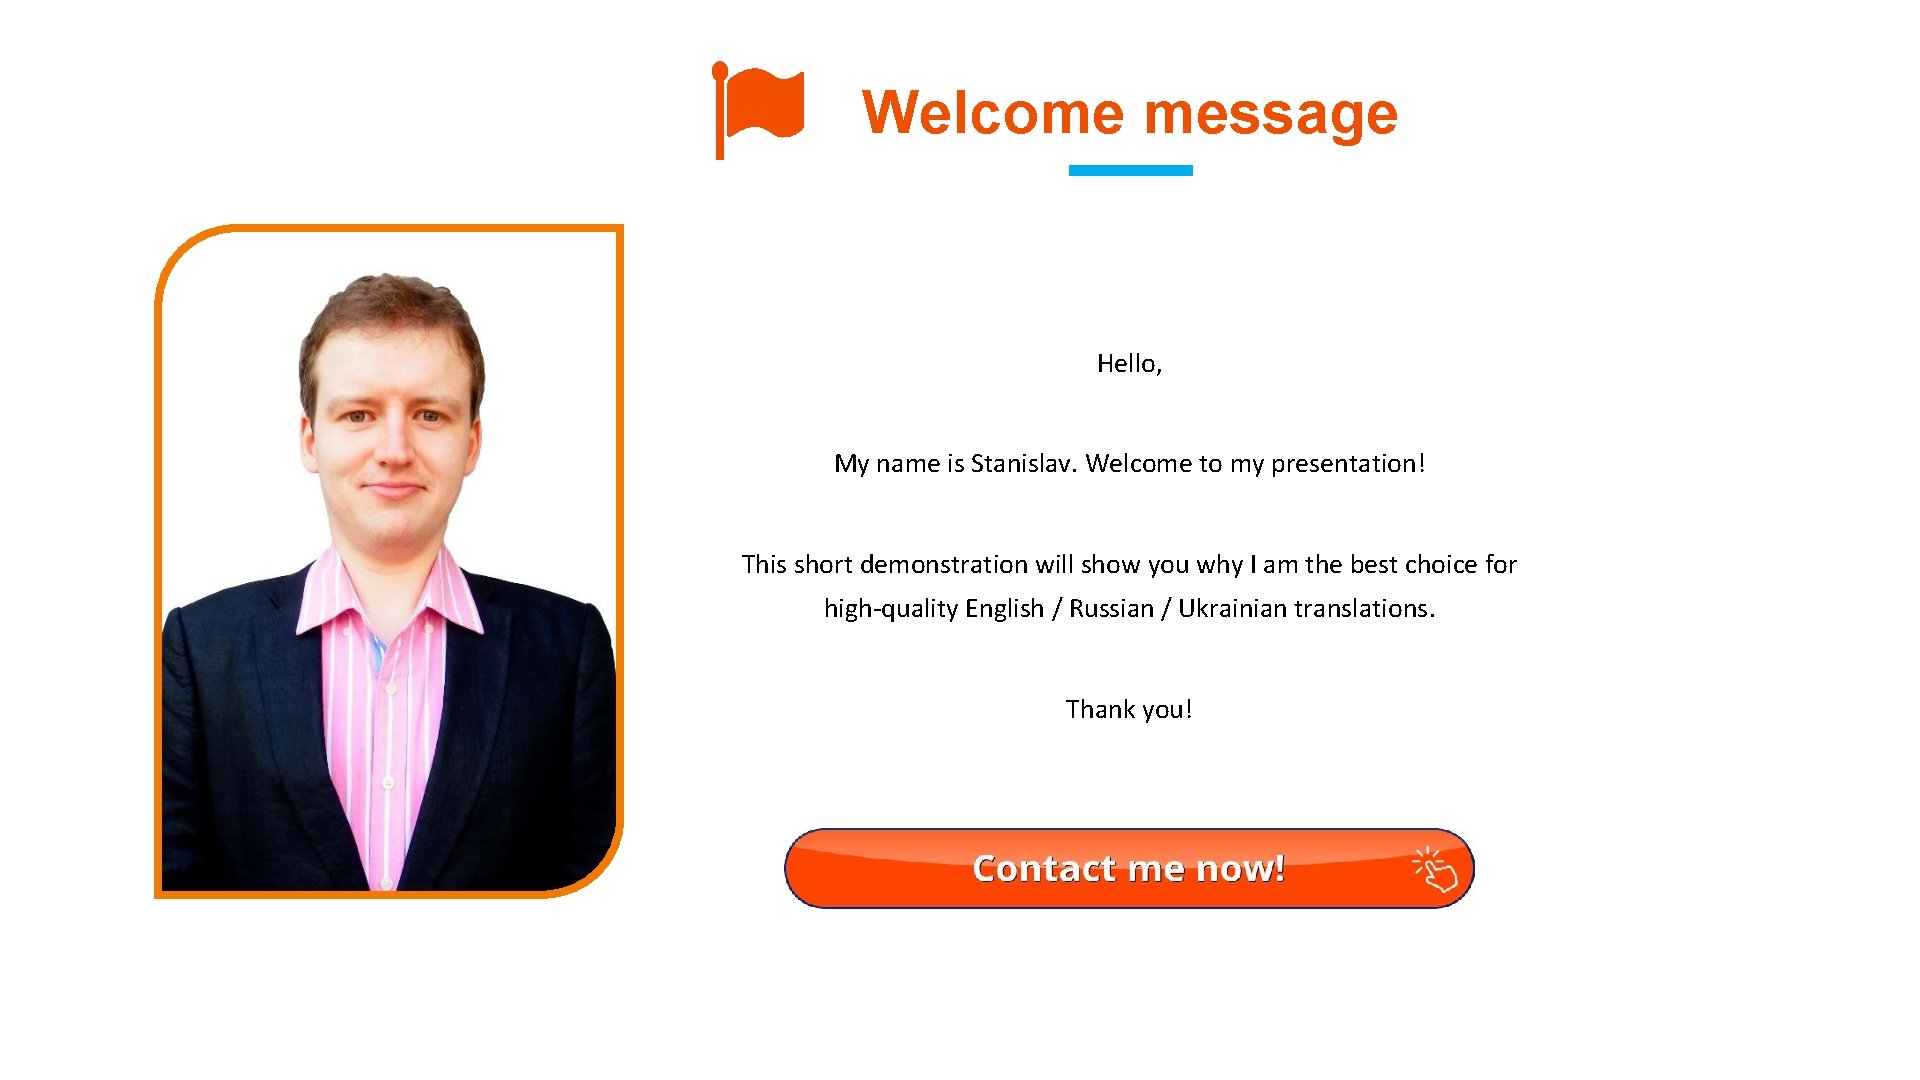 Welcome message Hello, My name is Stanislav. Welcome to my presentation! This short demonstration